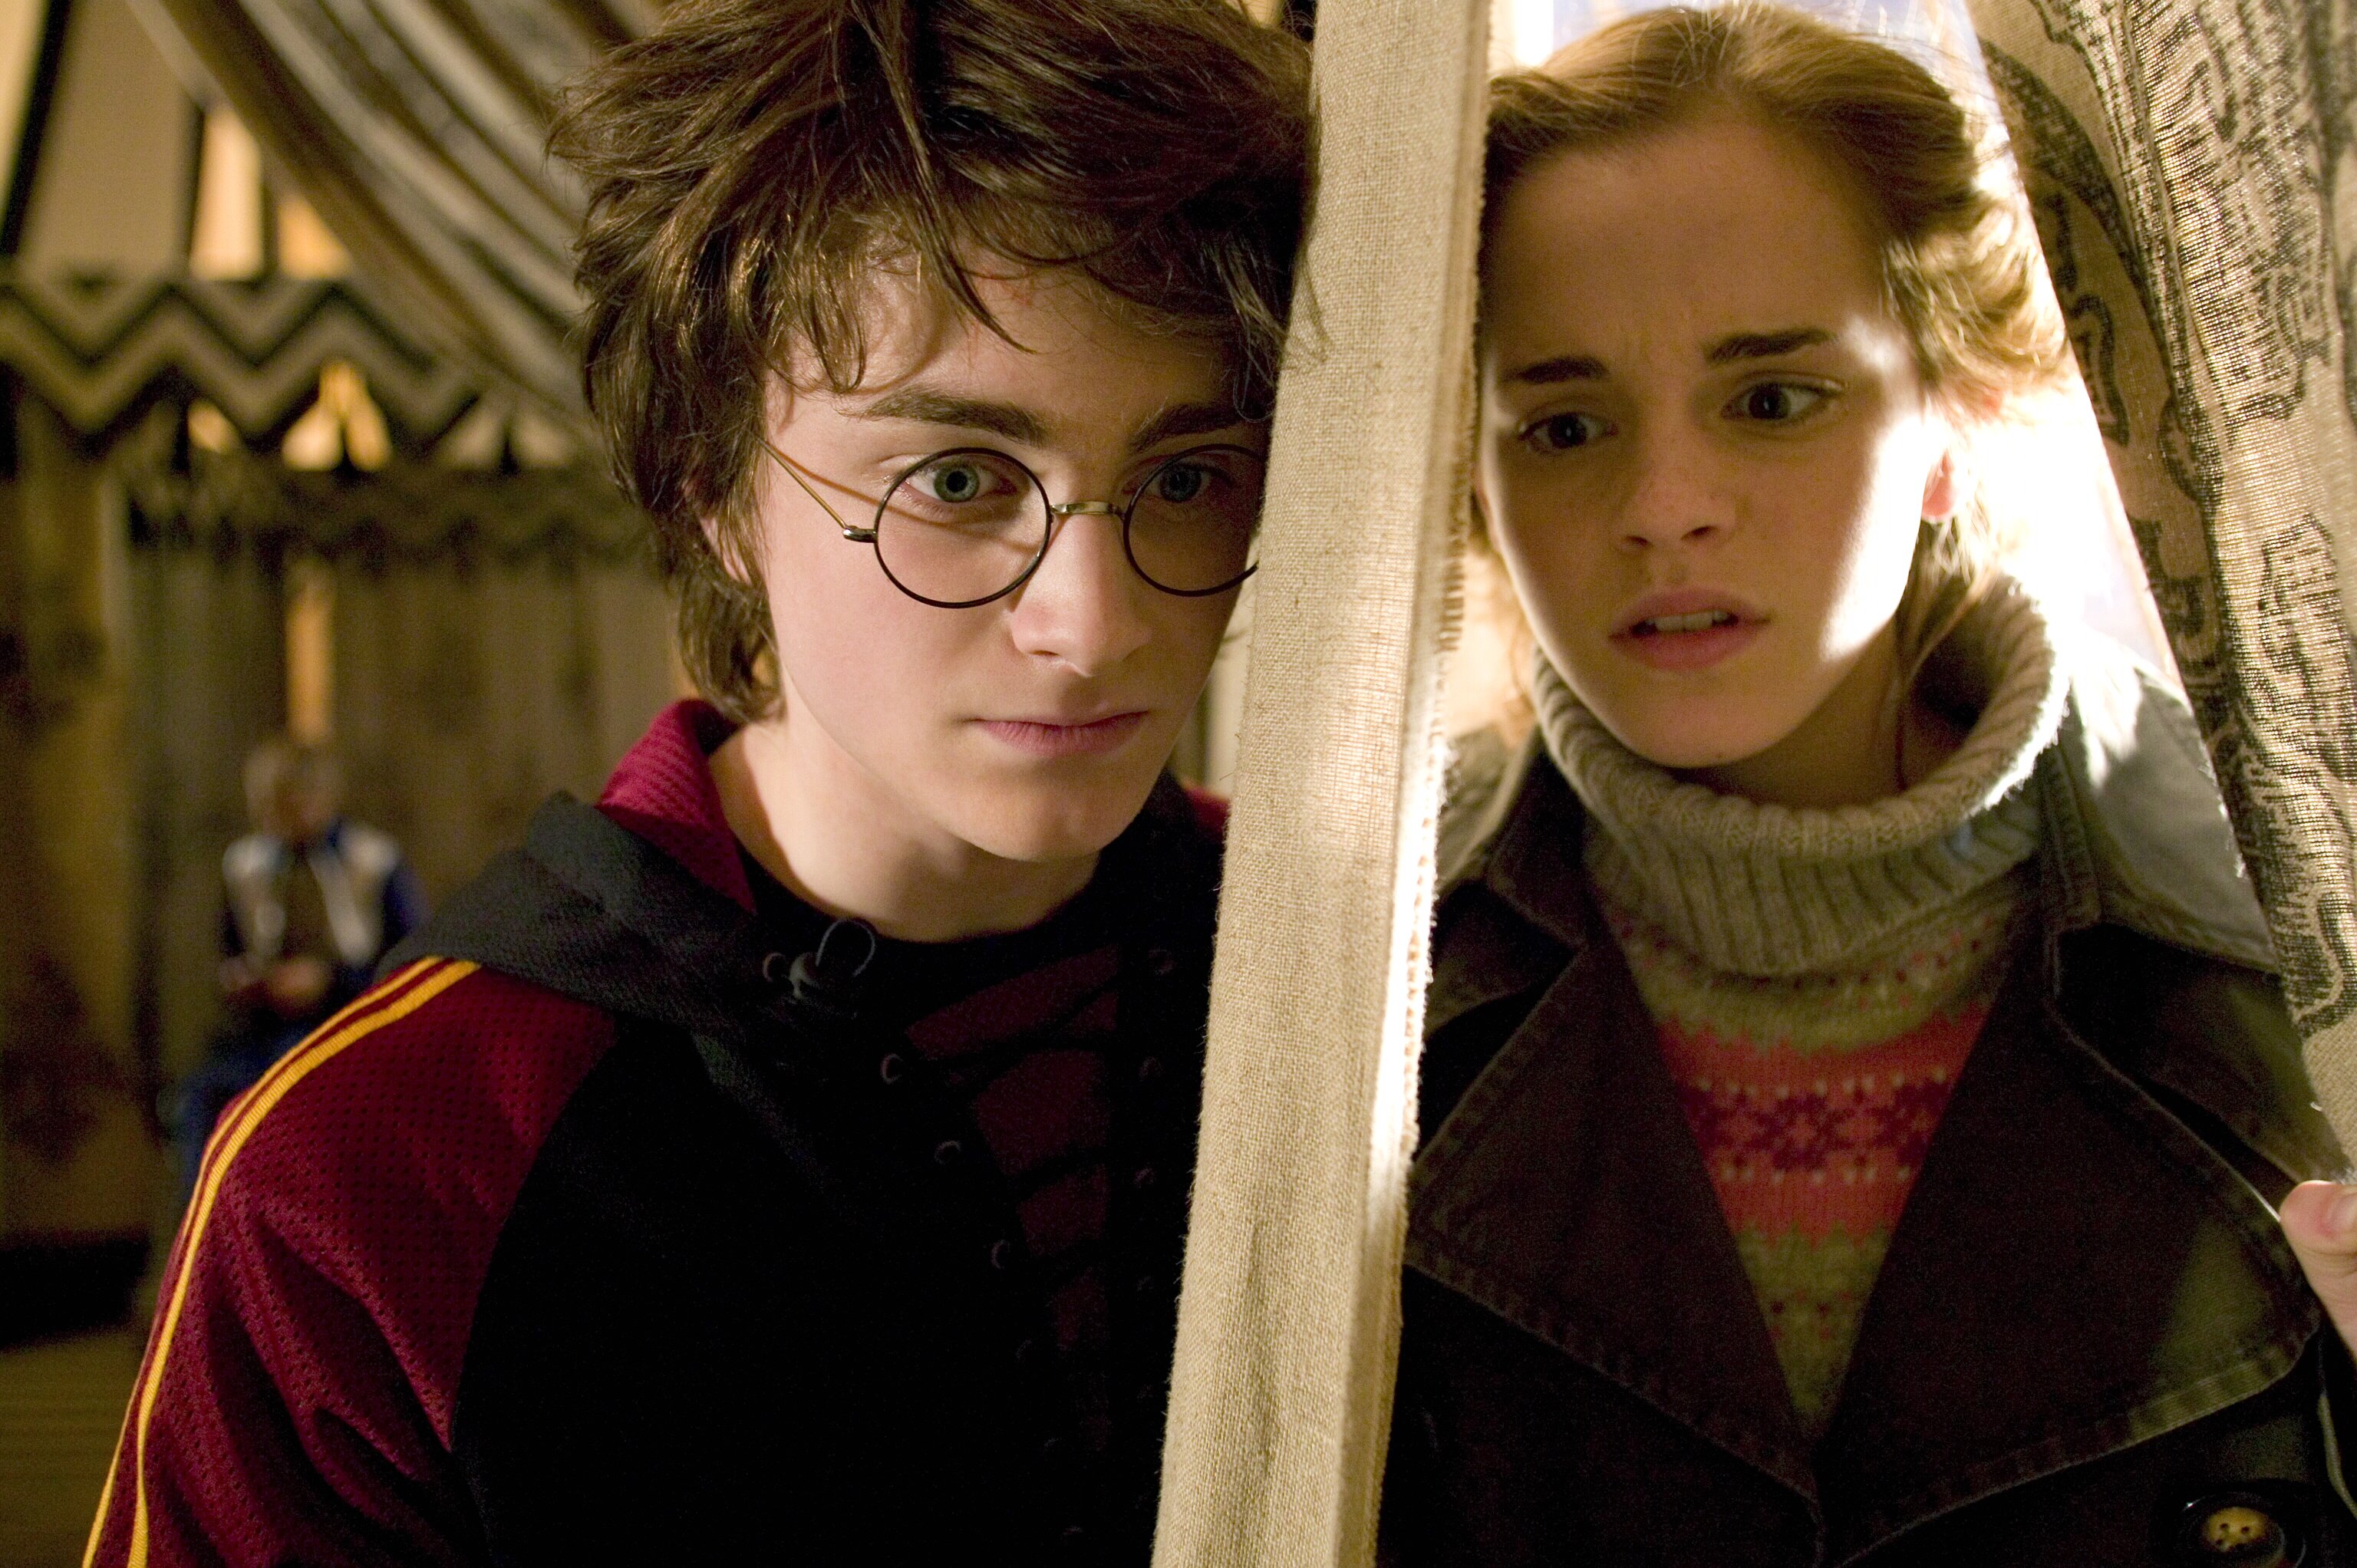 harry potter, movie, harry potter and the goblet of fire, daniel radcliffe, emma watson, hermione granger